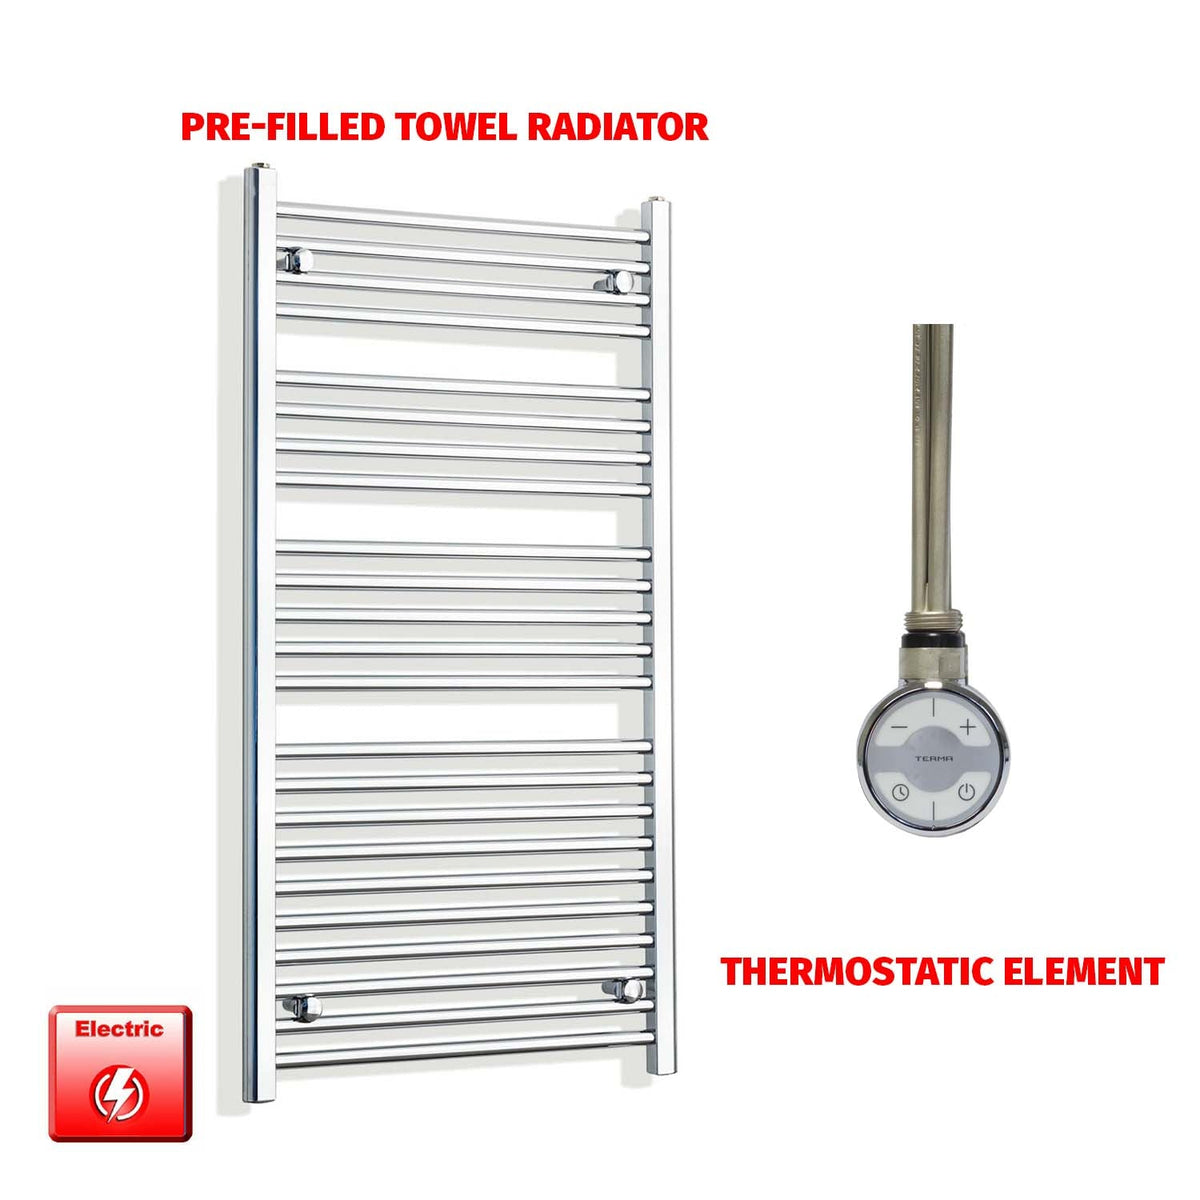 1200mm High 550mm Wide Pre-Filled Electric Heated Towel Radiator Chrome HTR MOA Thermostatic element no timer